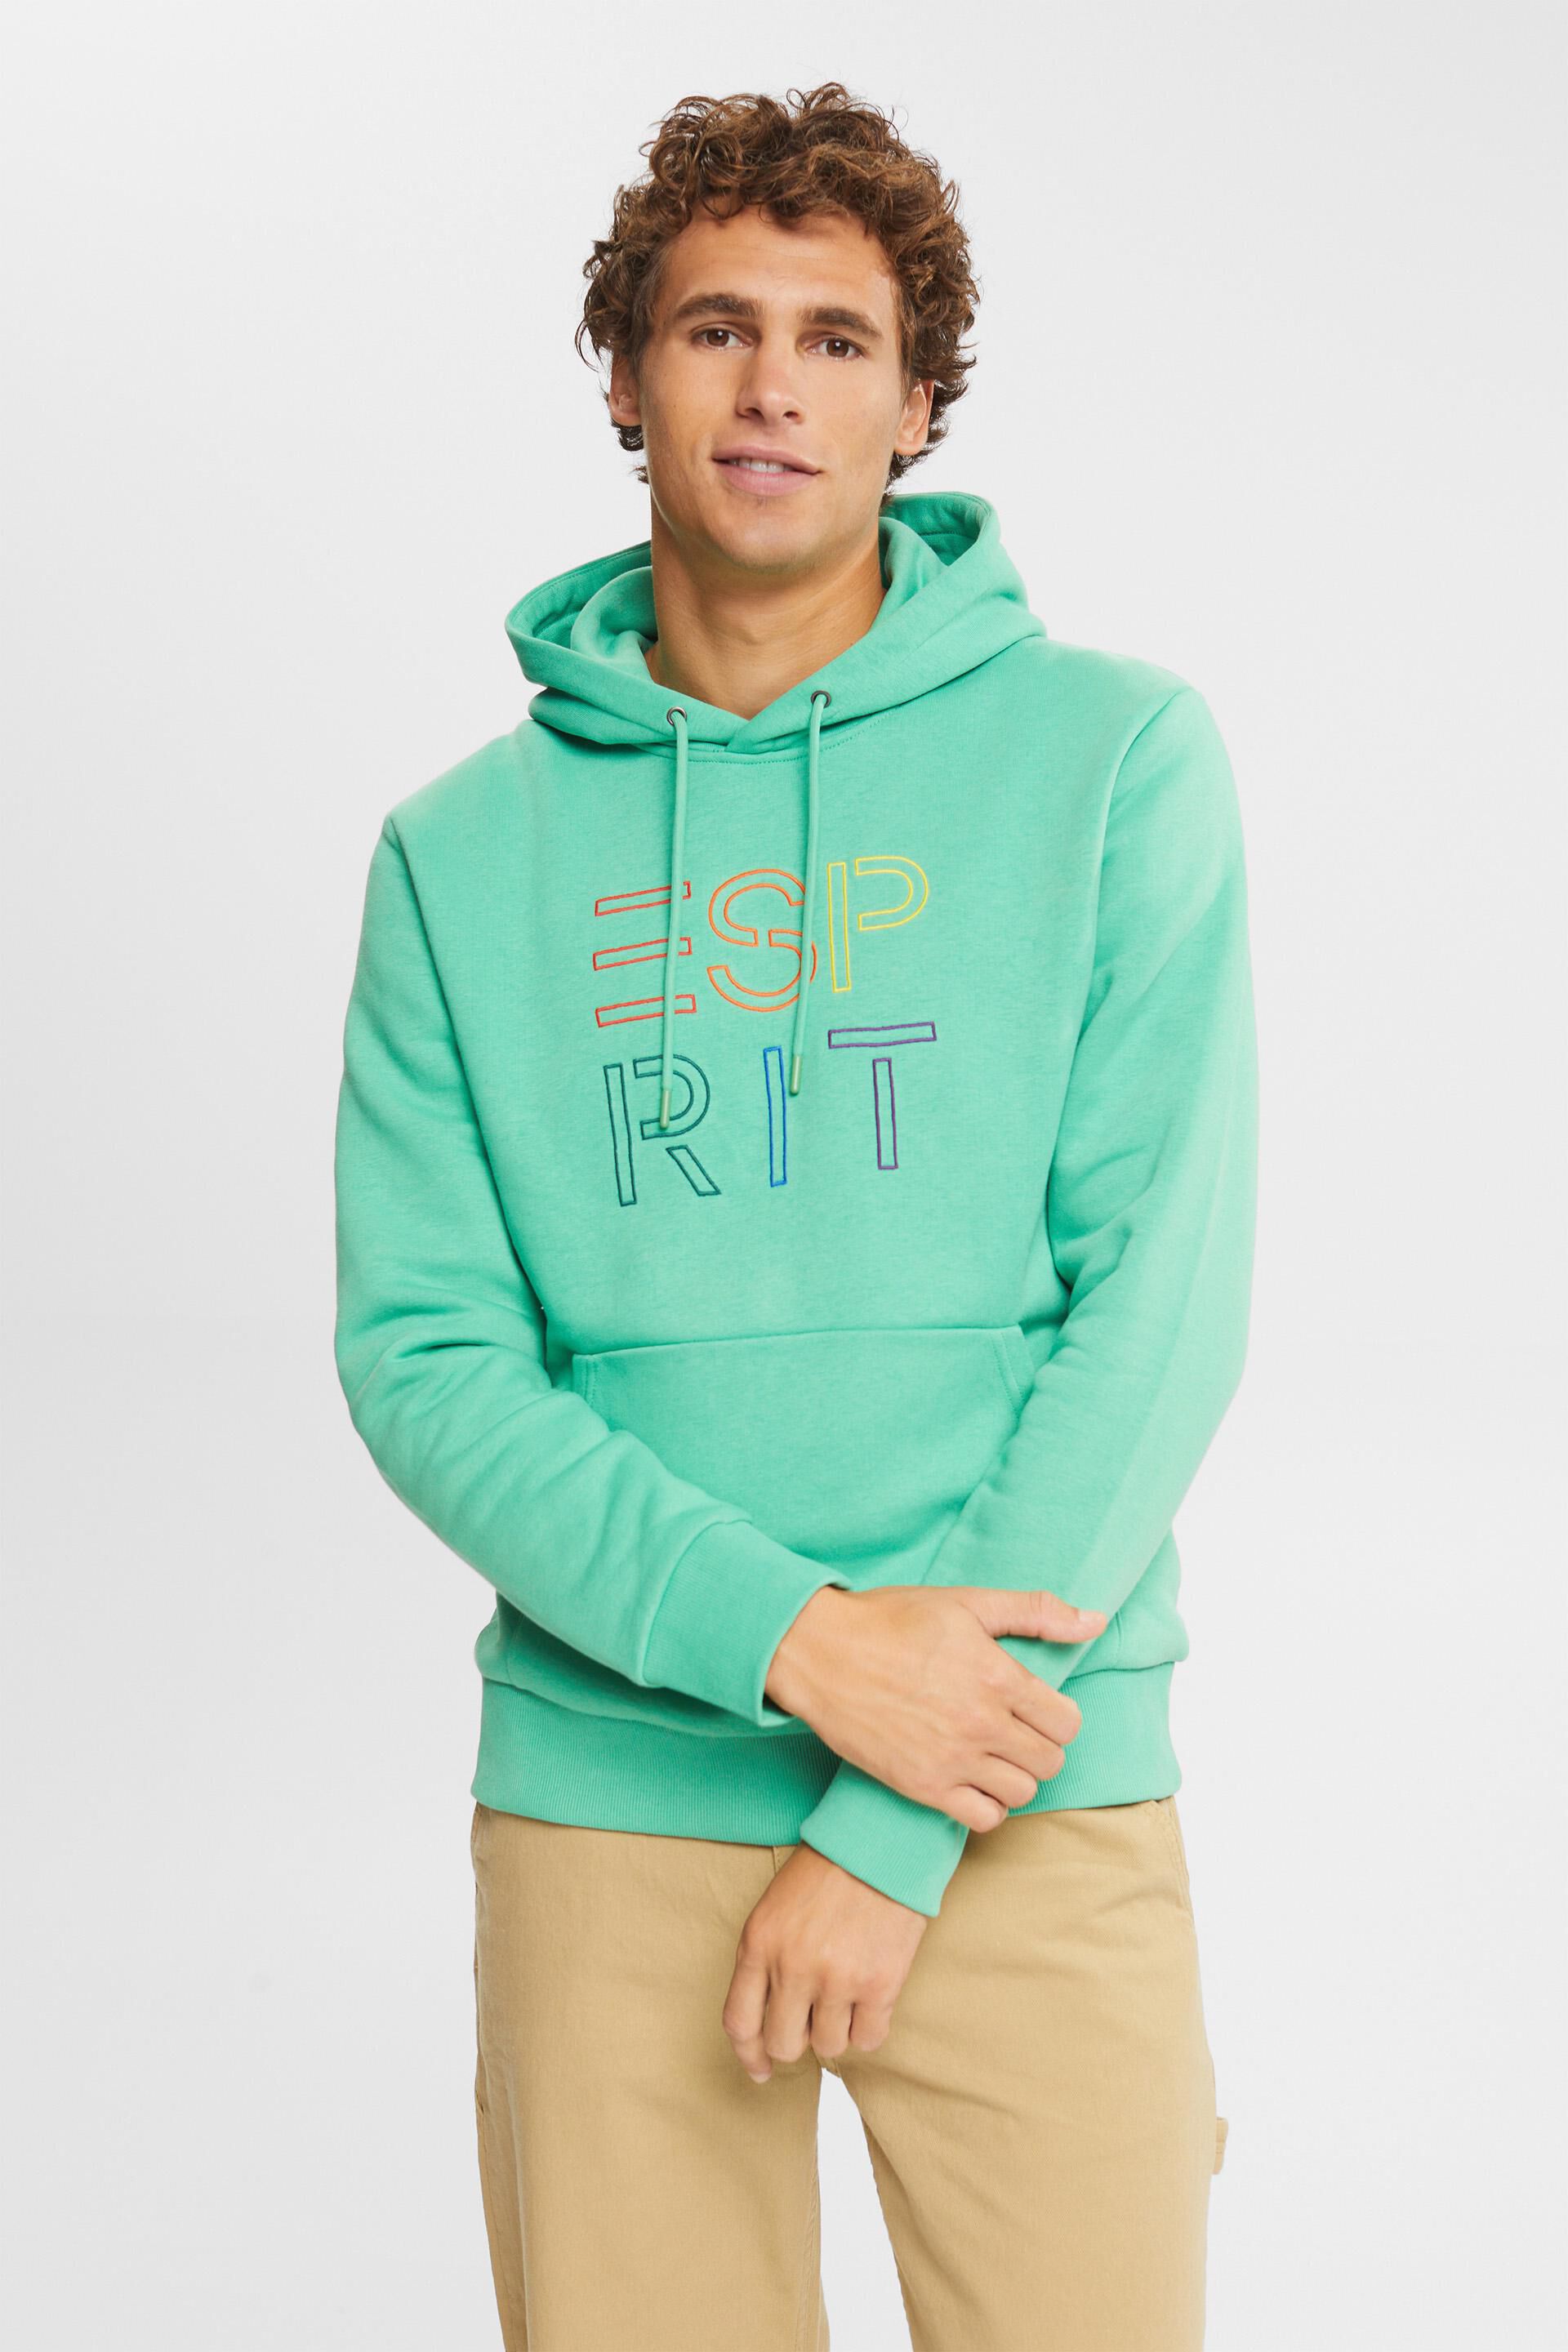 Esprit recycled Made logo hoodie material: with embroidery of